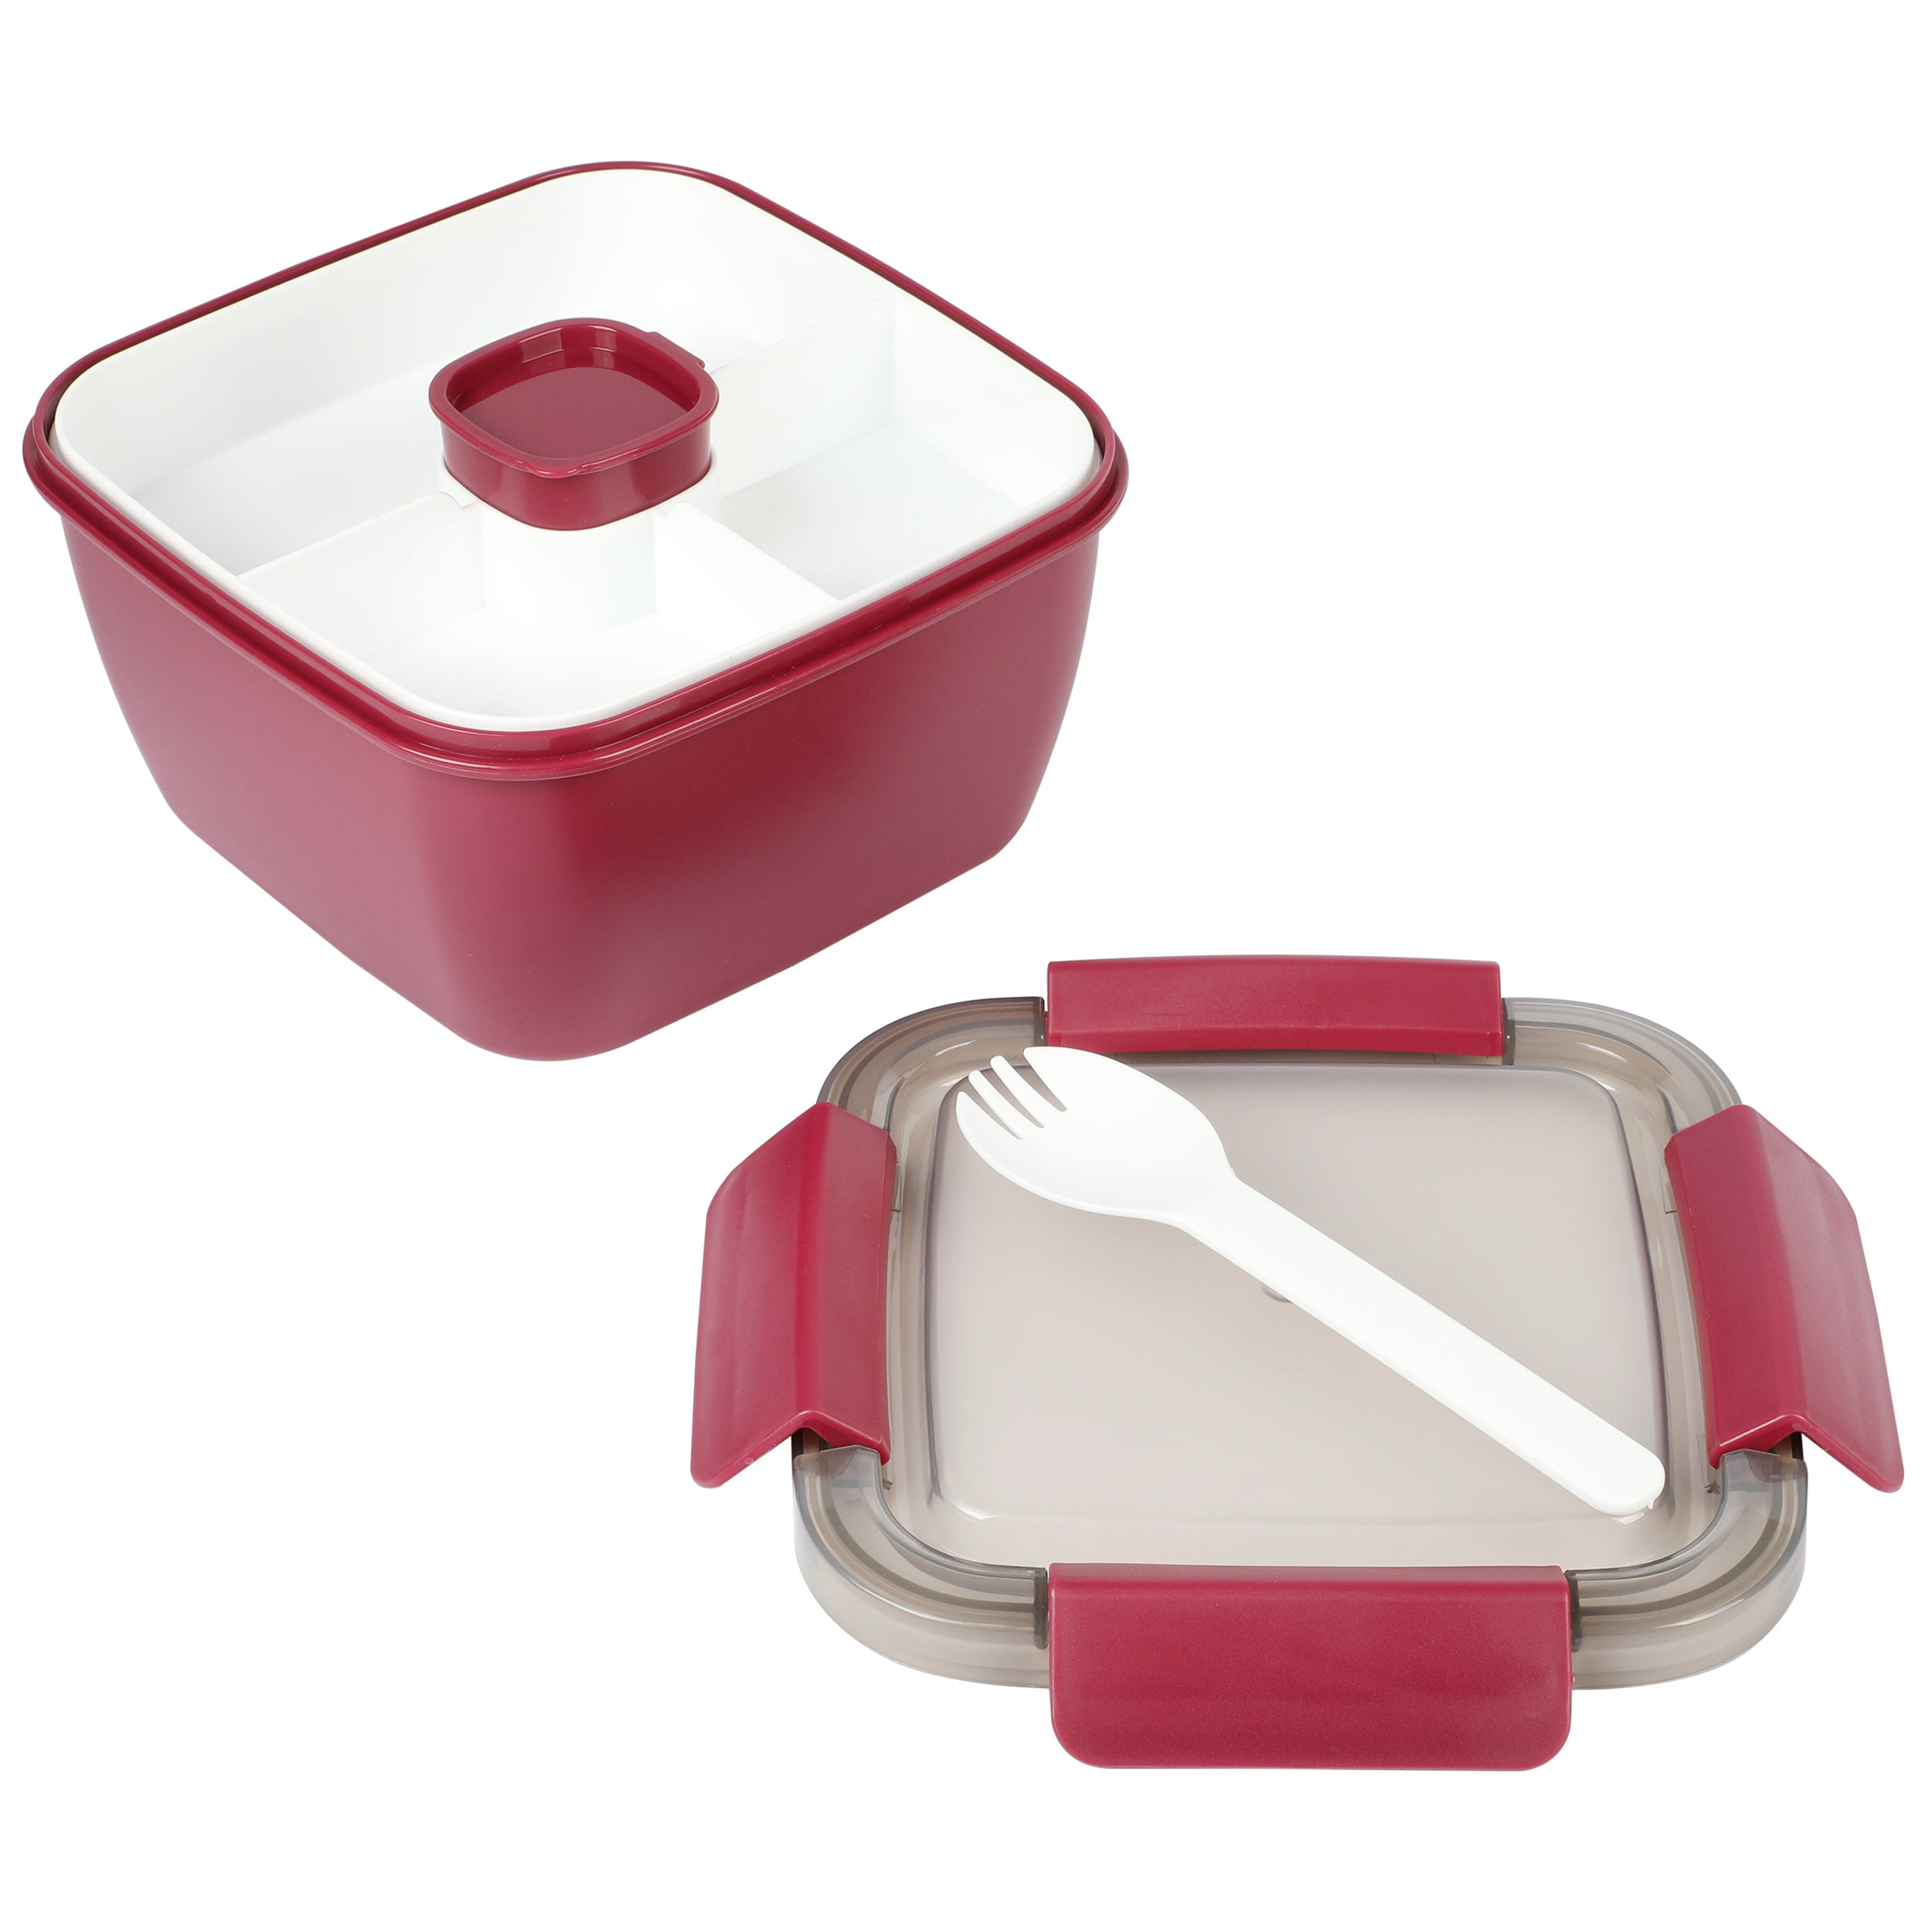 Spice BY TIA MOWRY 4-Piece Stackable Plastic Food Storage Set